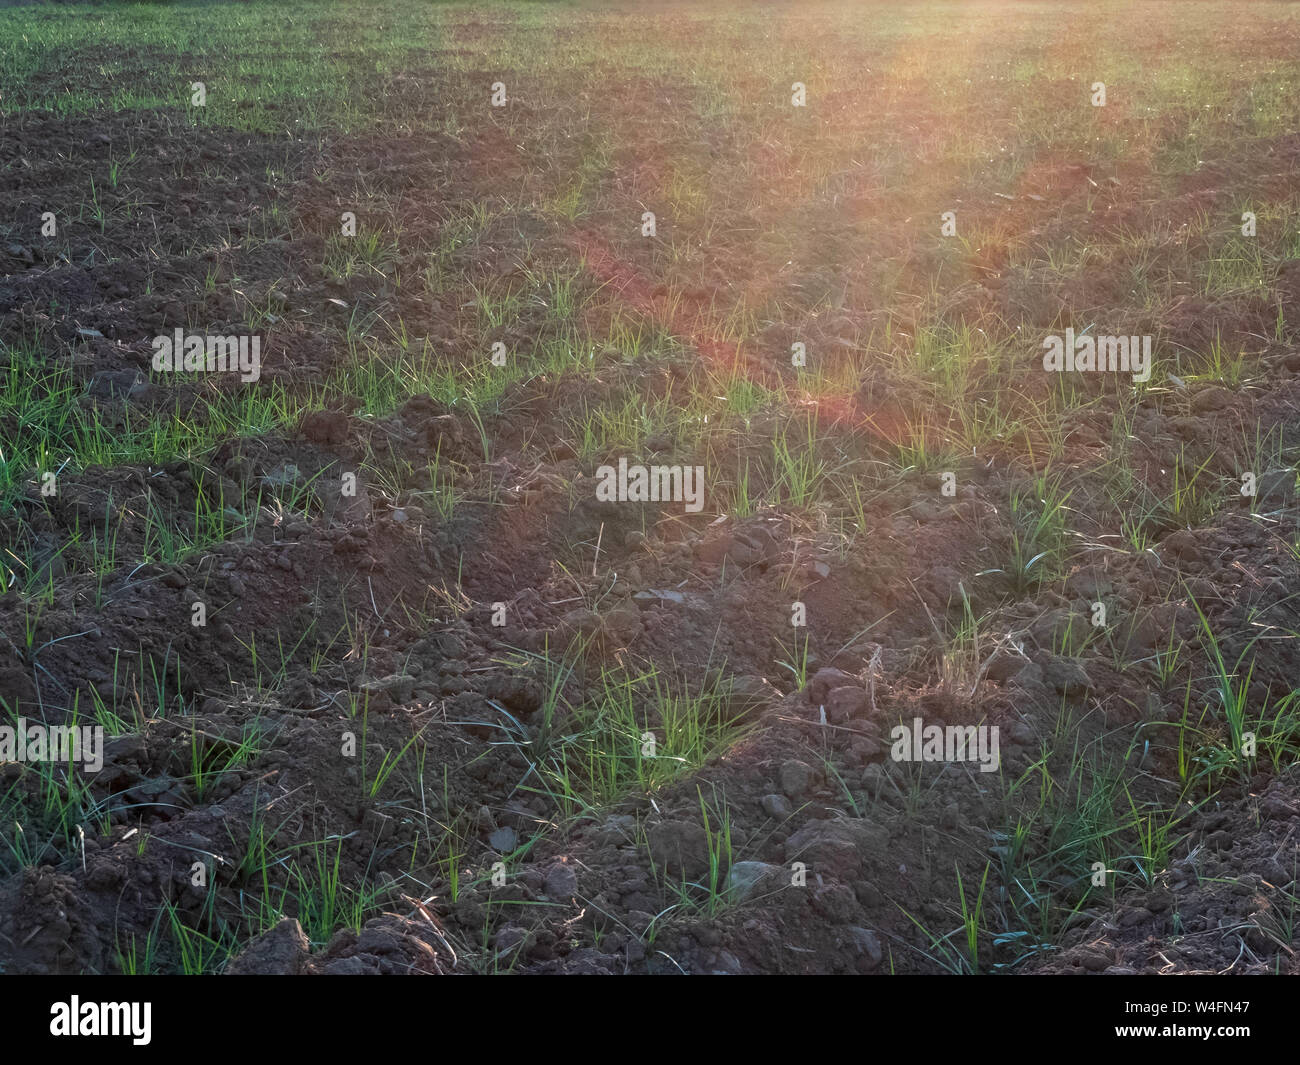 Furrows and young sprouts of wheat in the agricultural field. Stock Photo